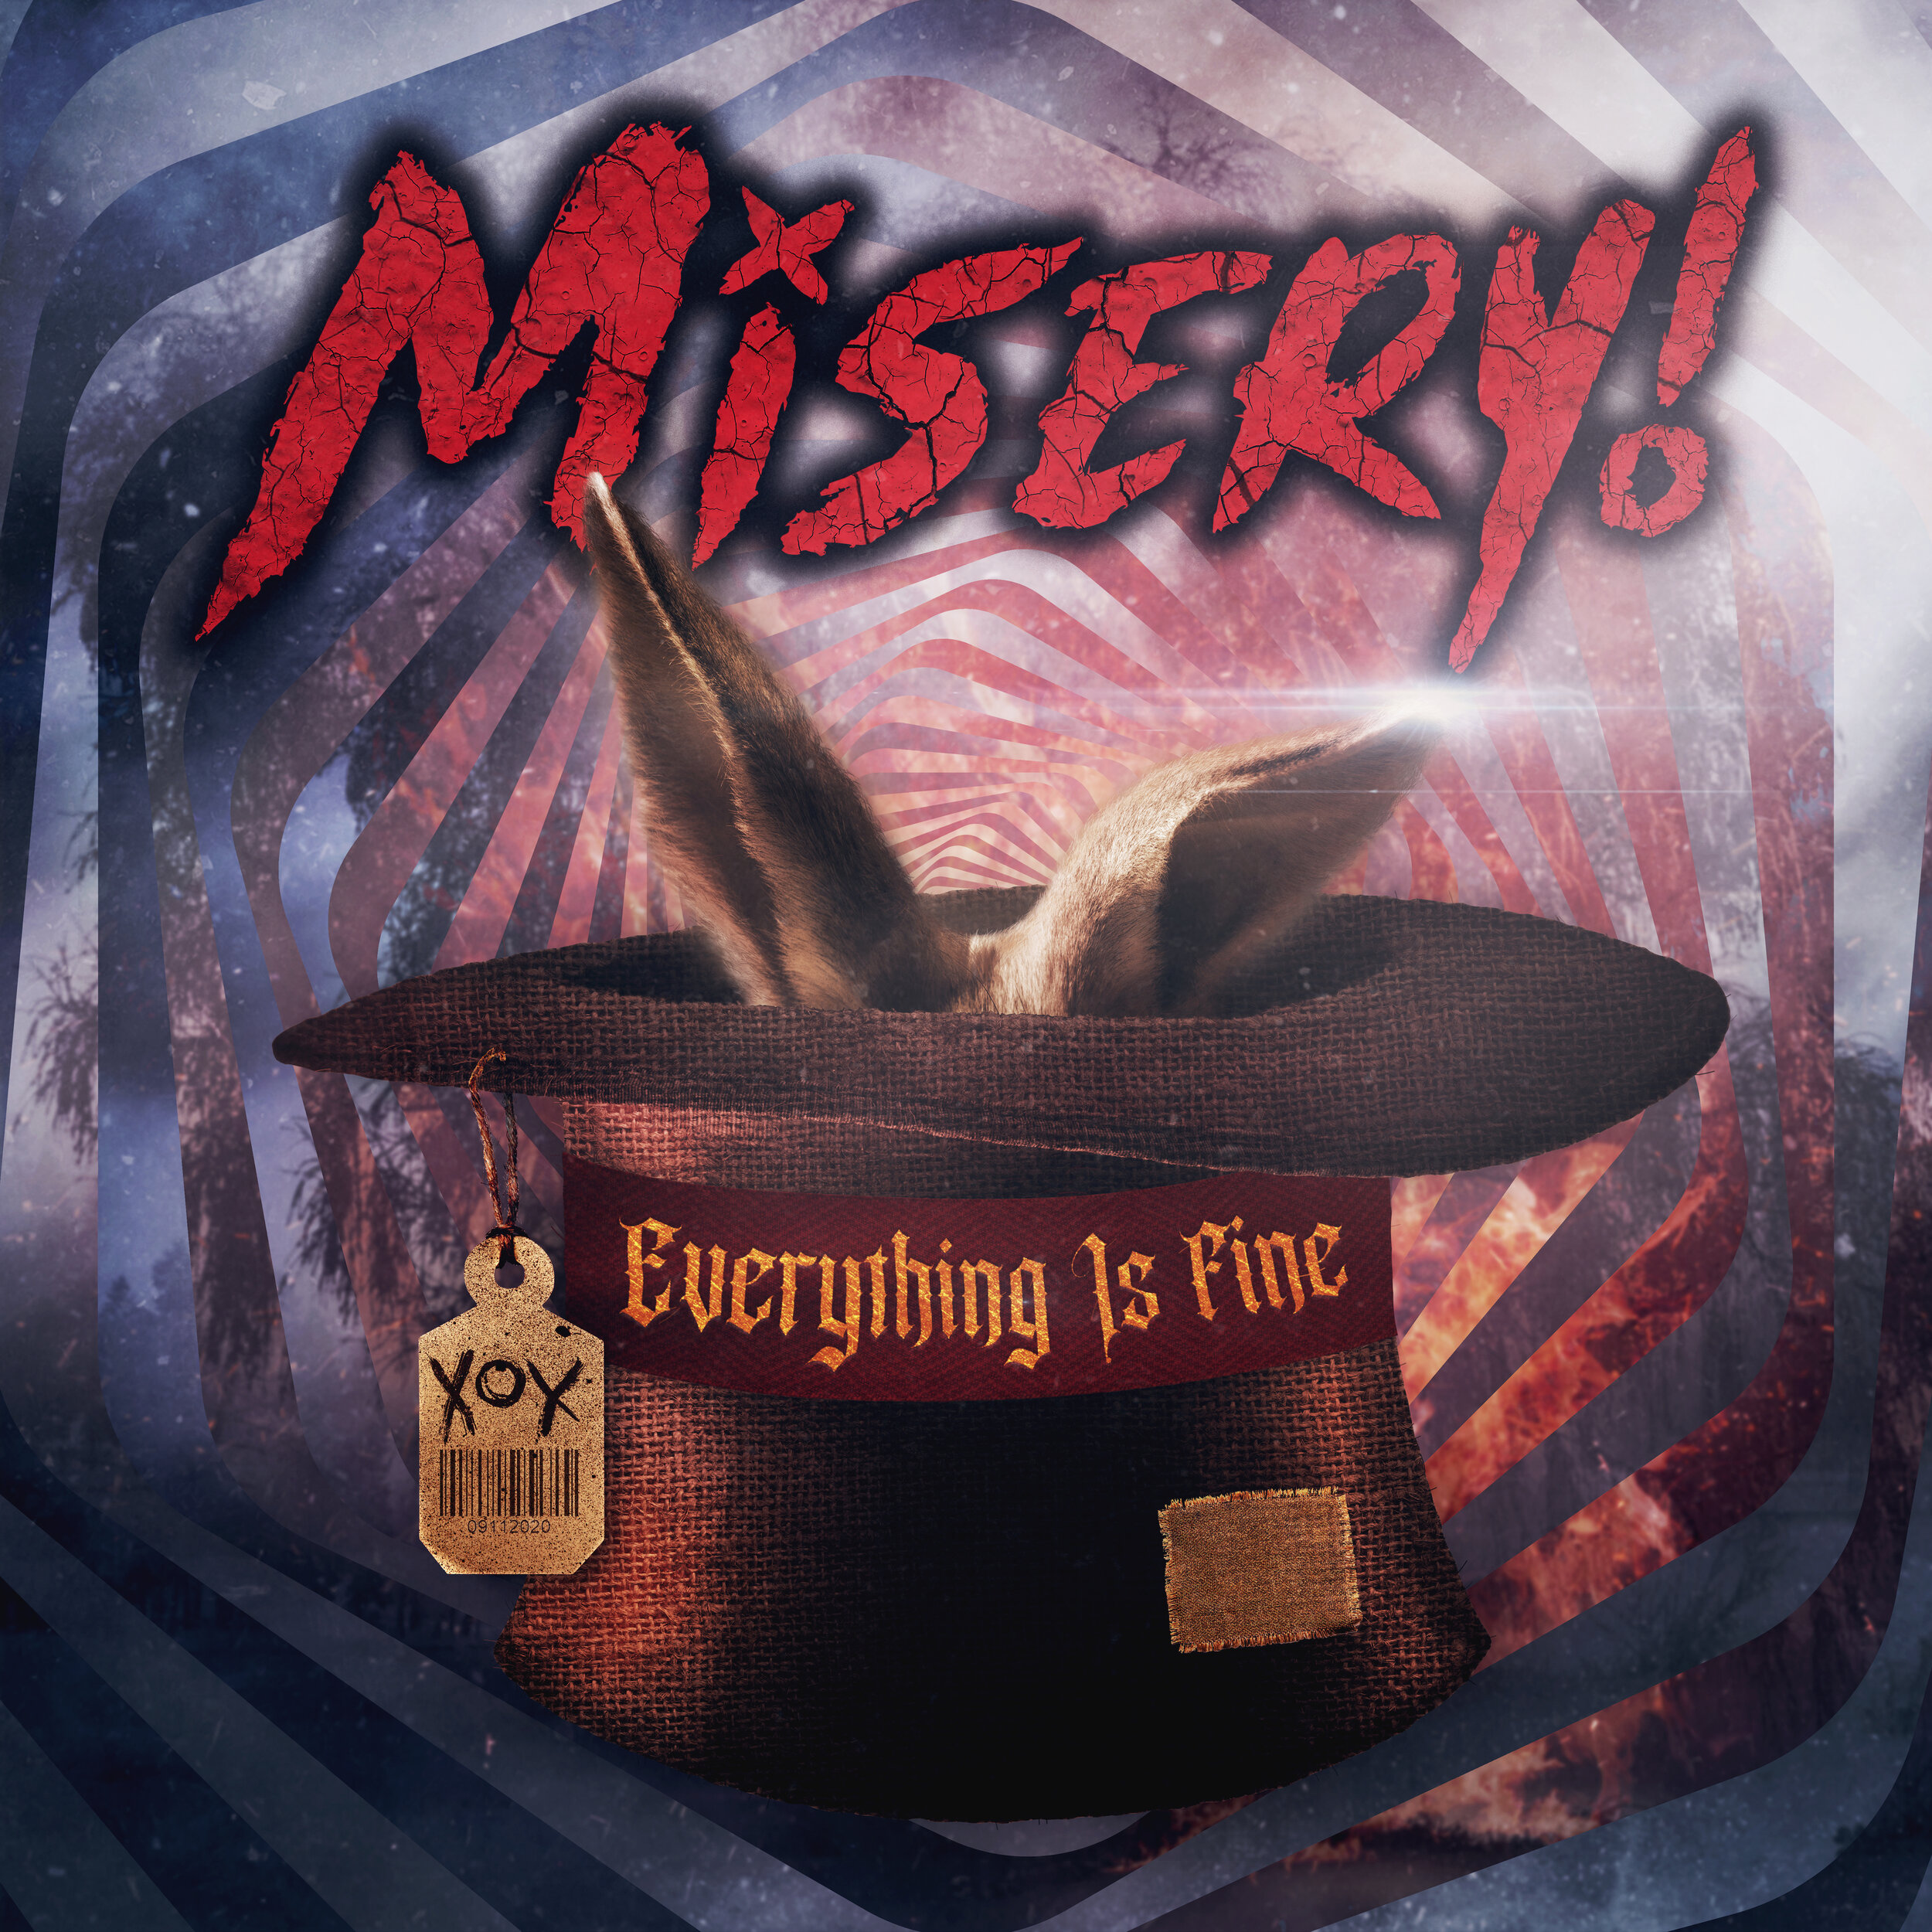 Misery! - "Everything Is Fine"